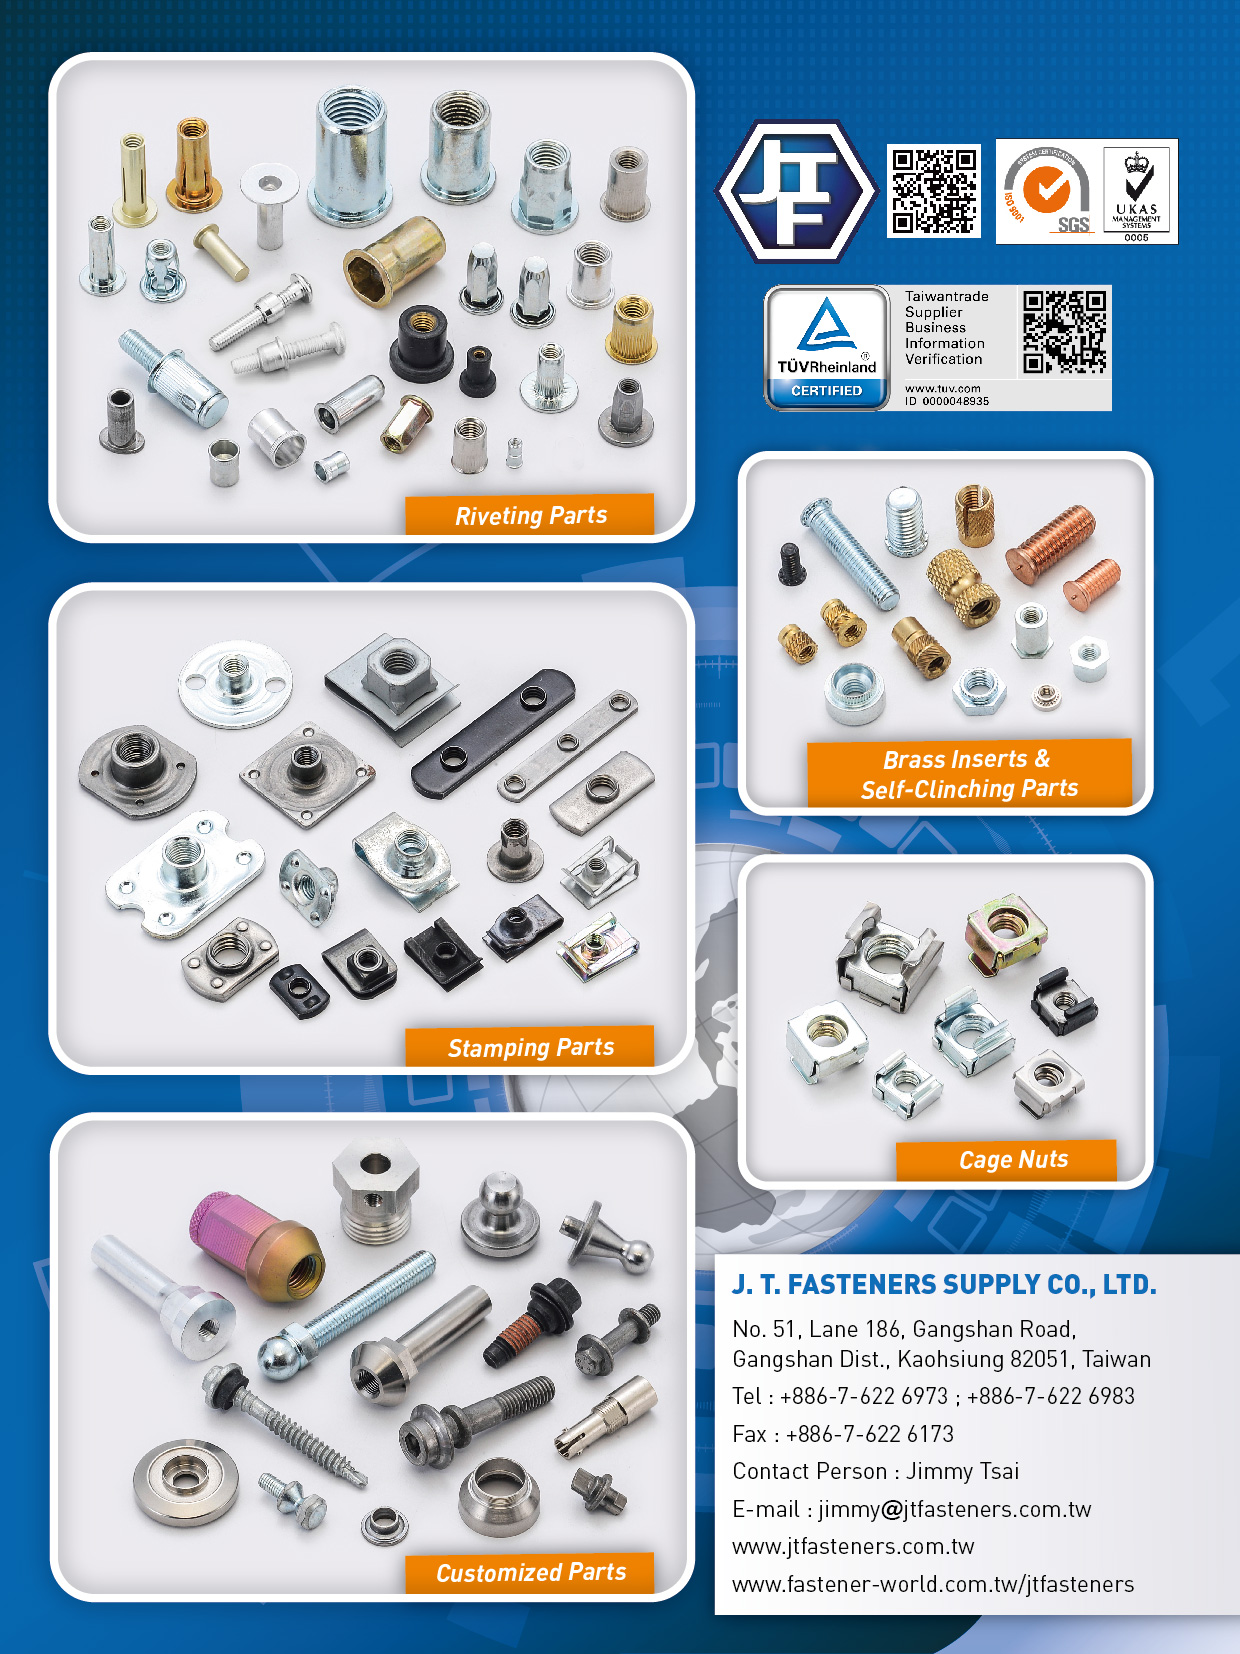 J. T. FASTENERS SUPPLY CO., LTD.  Online Catalogues